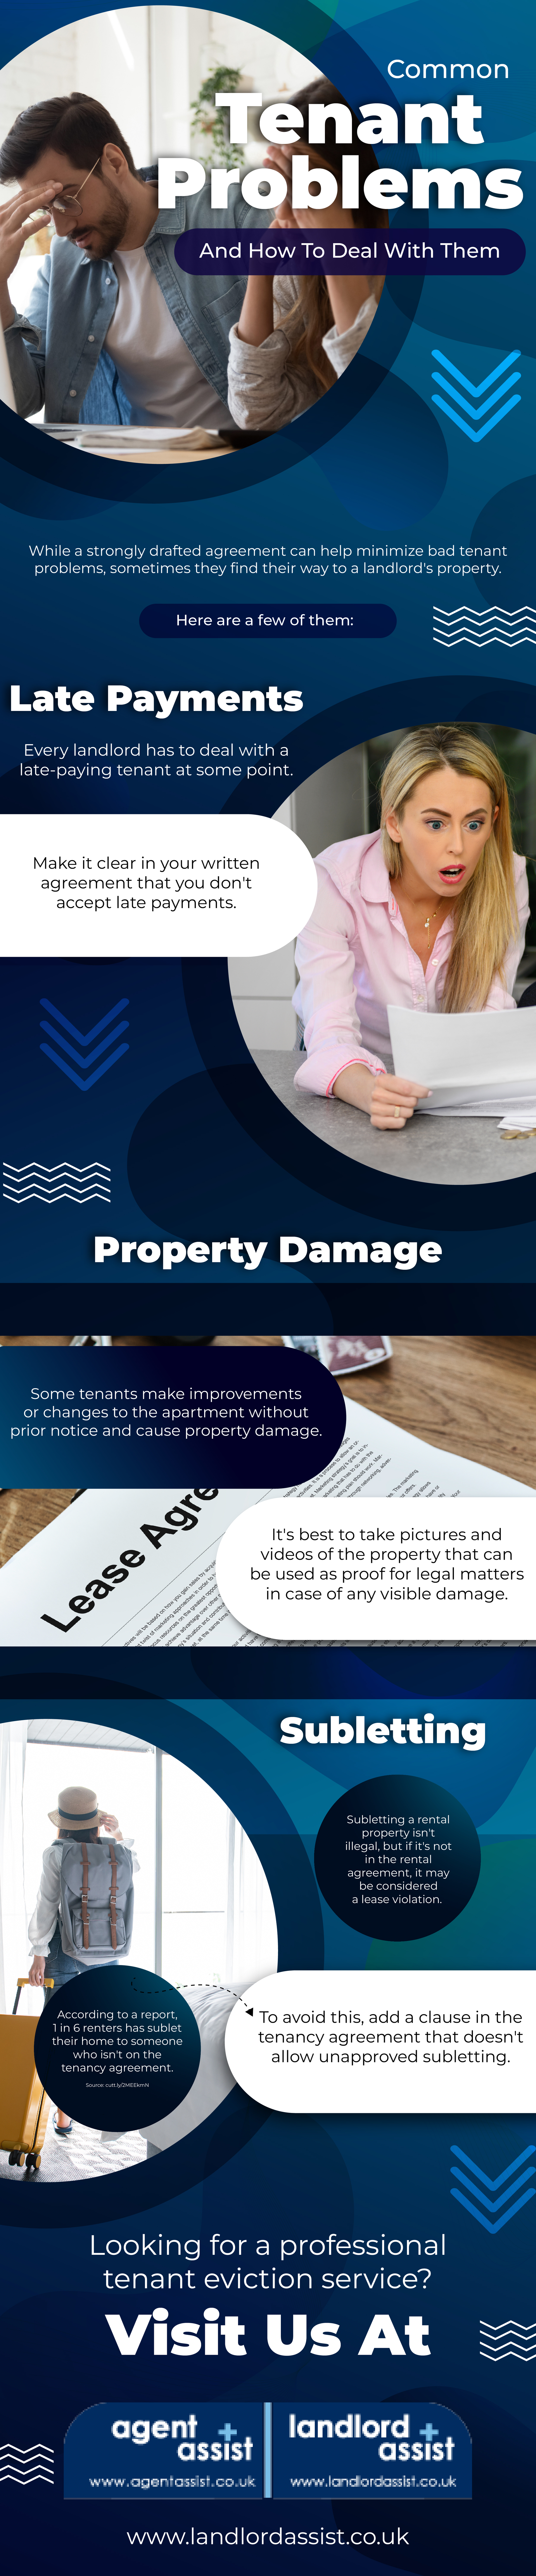 Common Tenant Problems and How To Deal With Them - Infograph